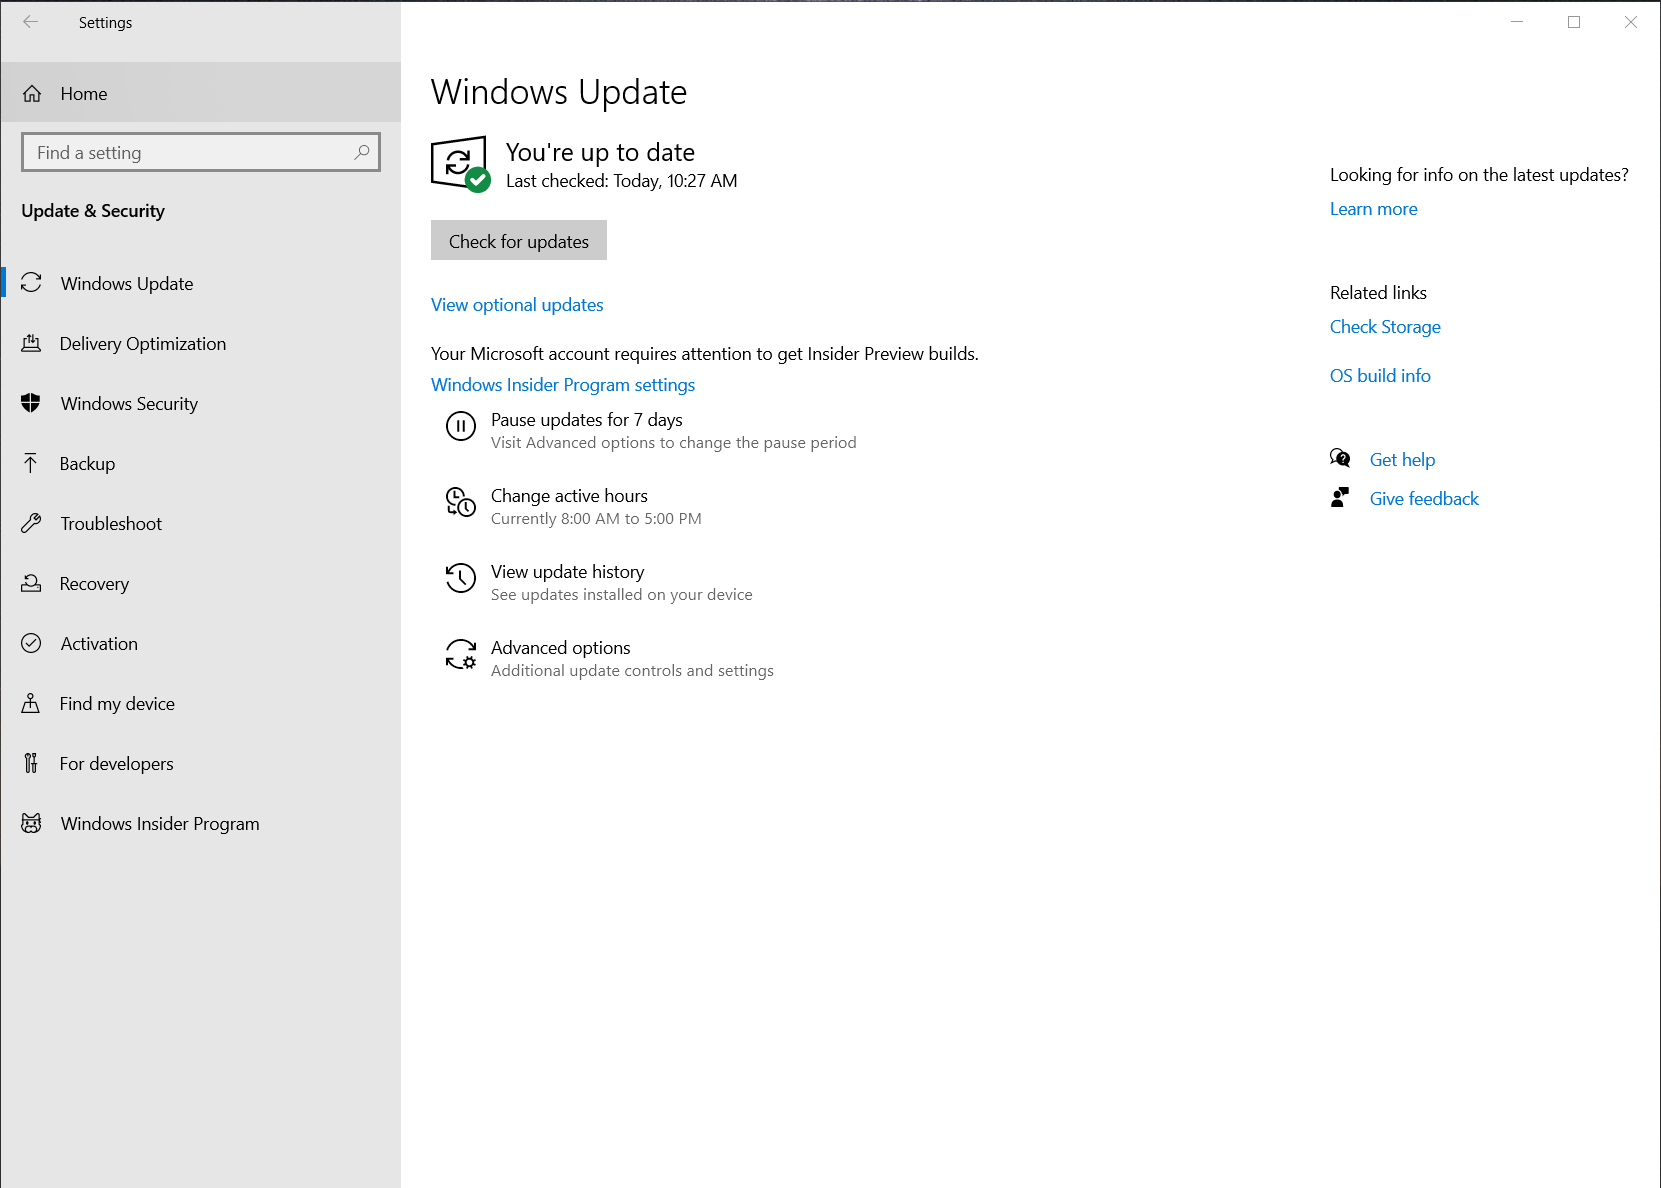 windows-update-will-make-it-easier-to-install-optional-drivers-in-windows-10-528621-2.png